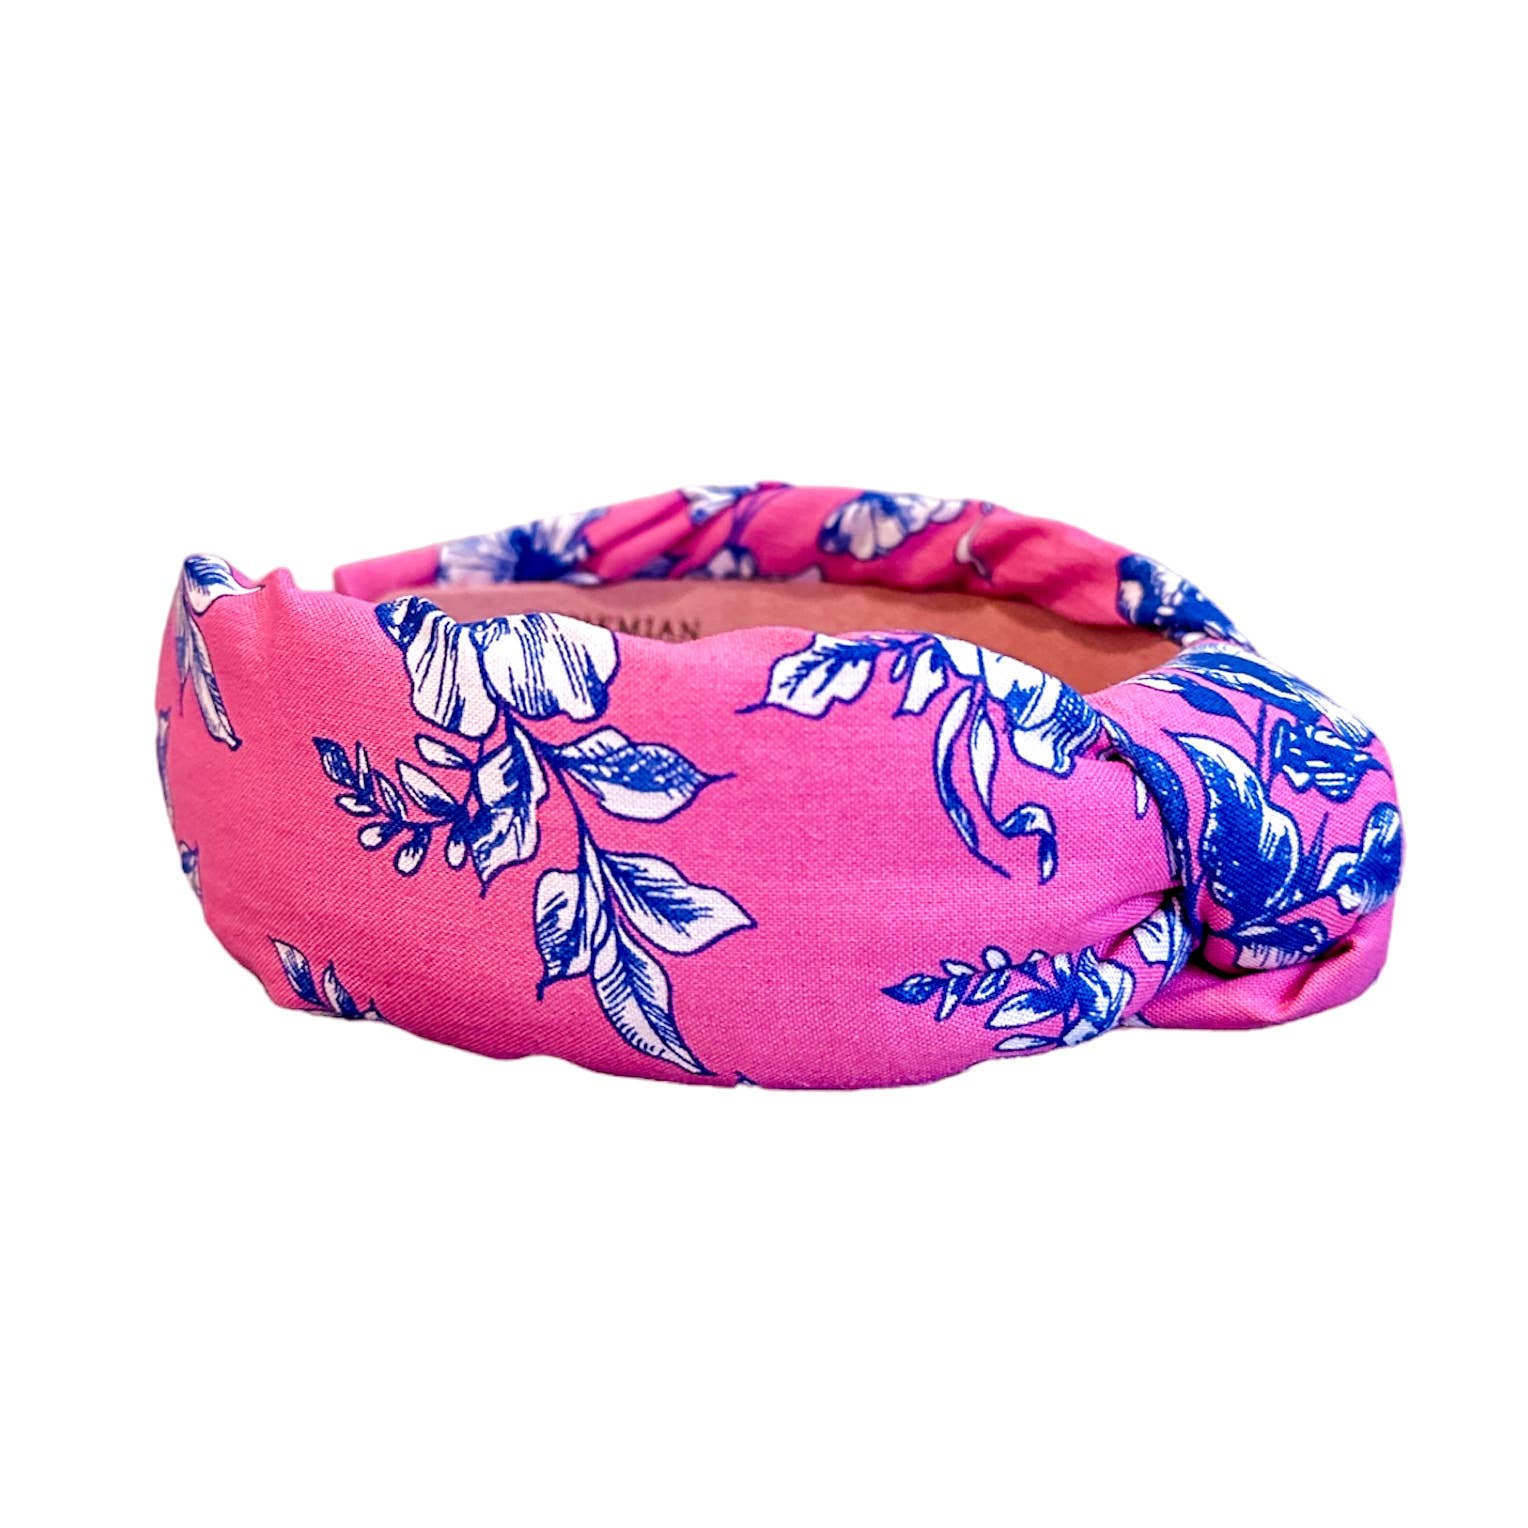 Pink and Blue Floral Knotted Headband. 